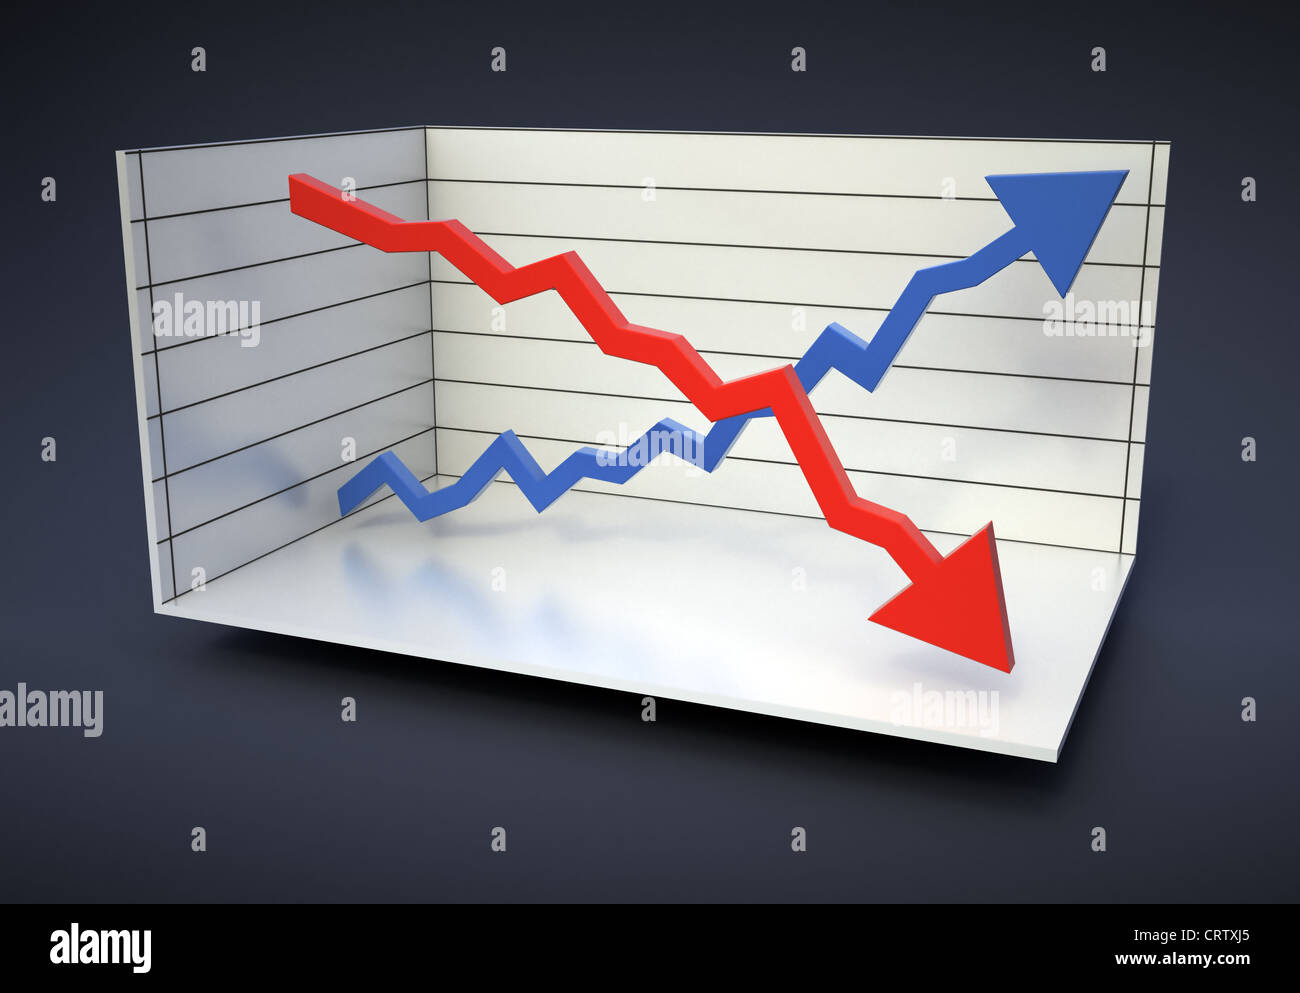 Red and blue graphs in an analytical chart Stock Photo